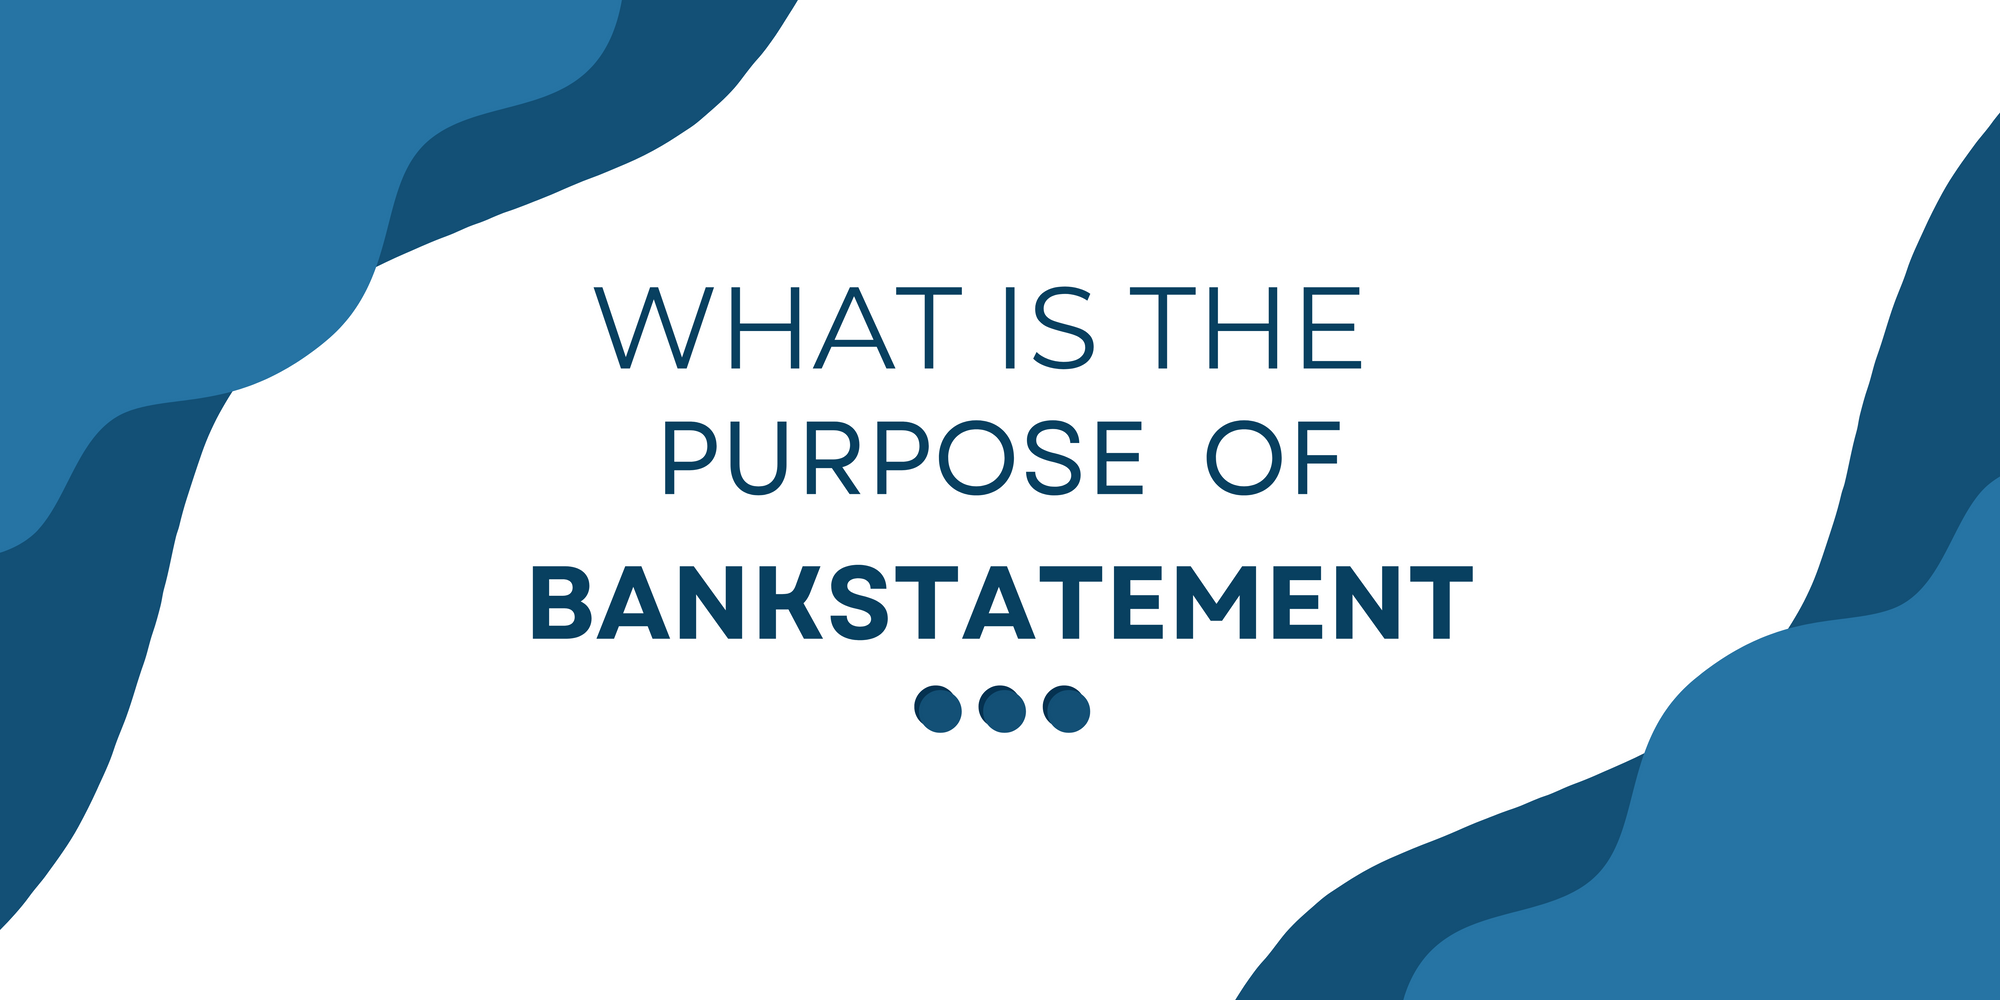 What is the purpose of a bank statement?